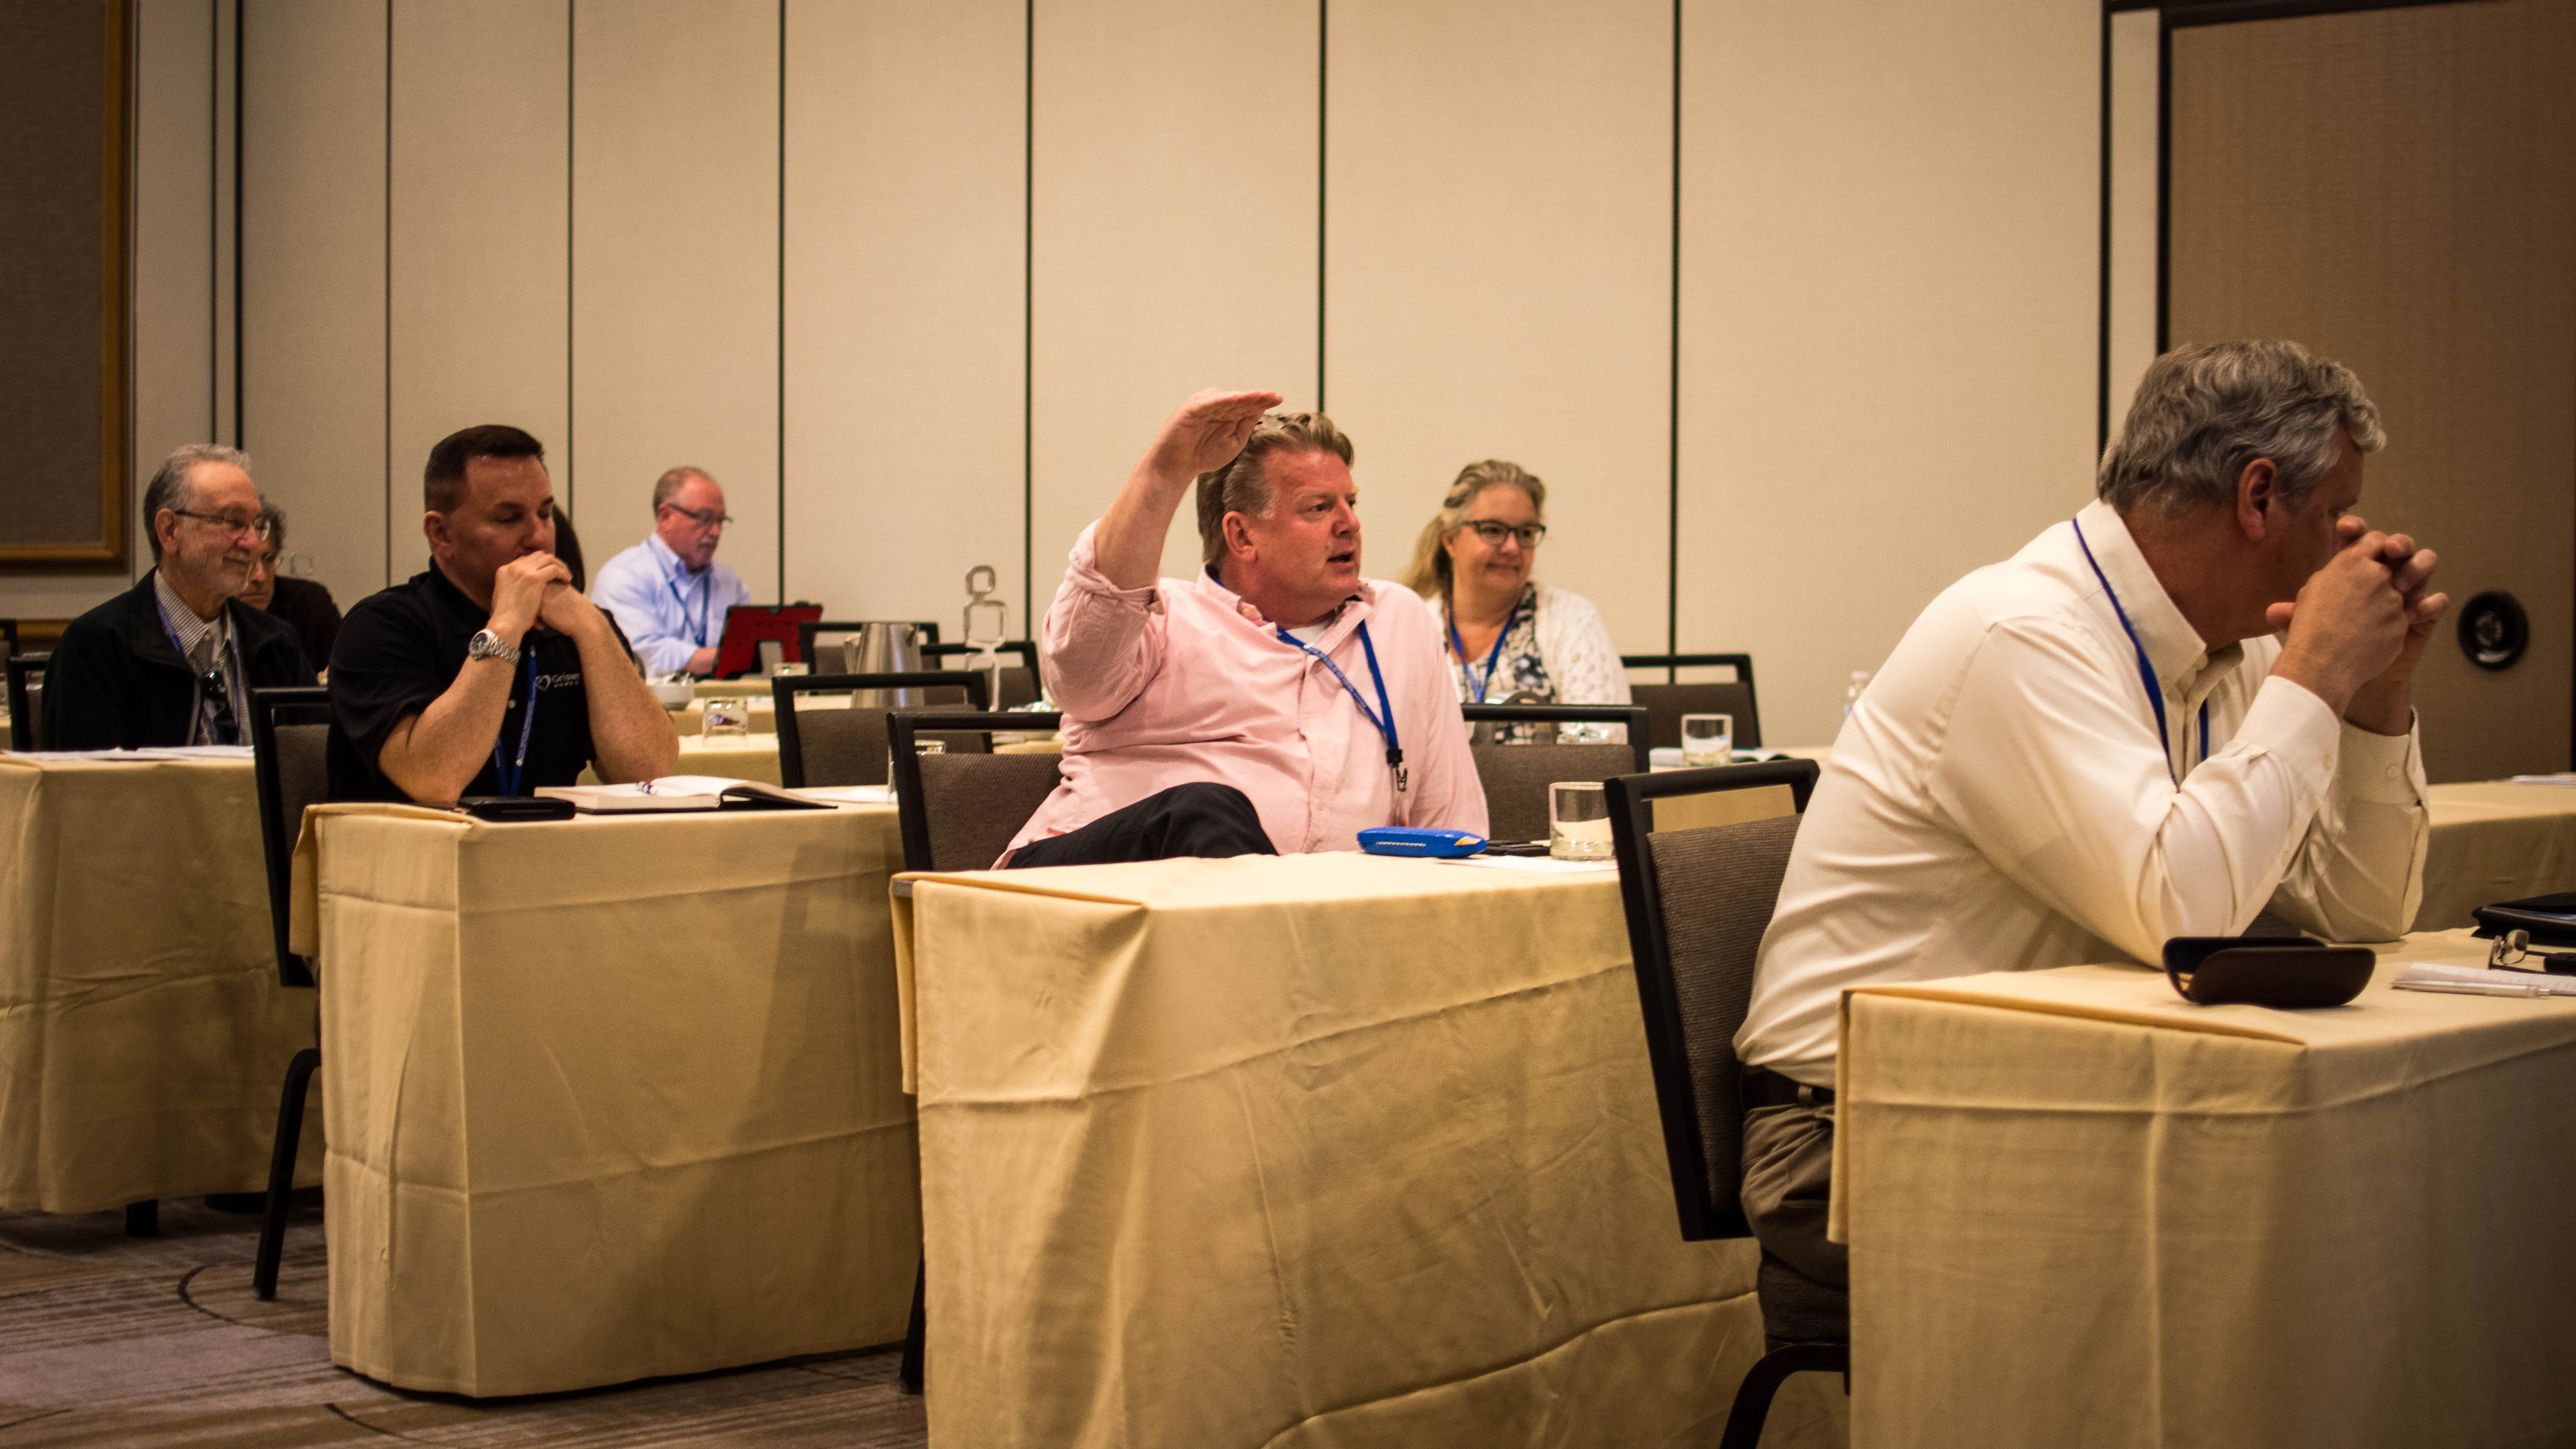 A photo shows Brian Schnell raising his hand vehemently while speaking to other franchisee attorneys during a meeting.